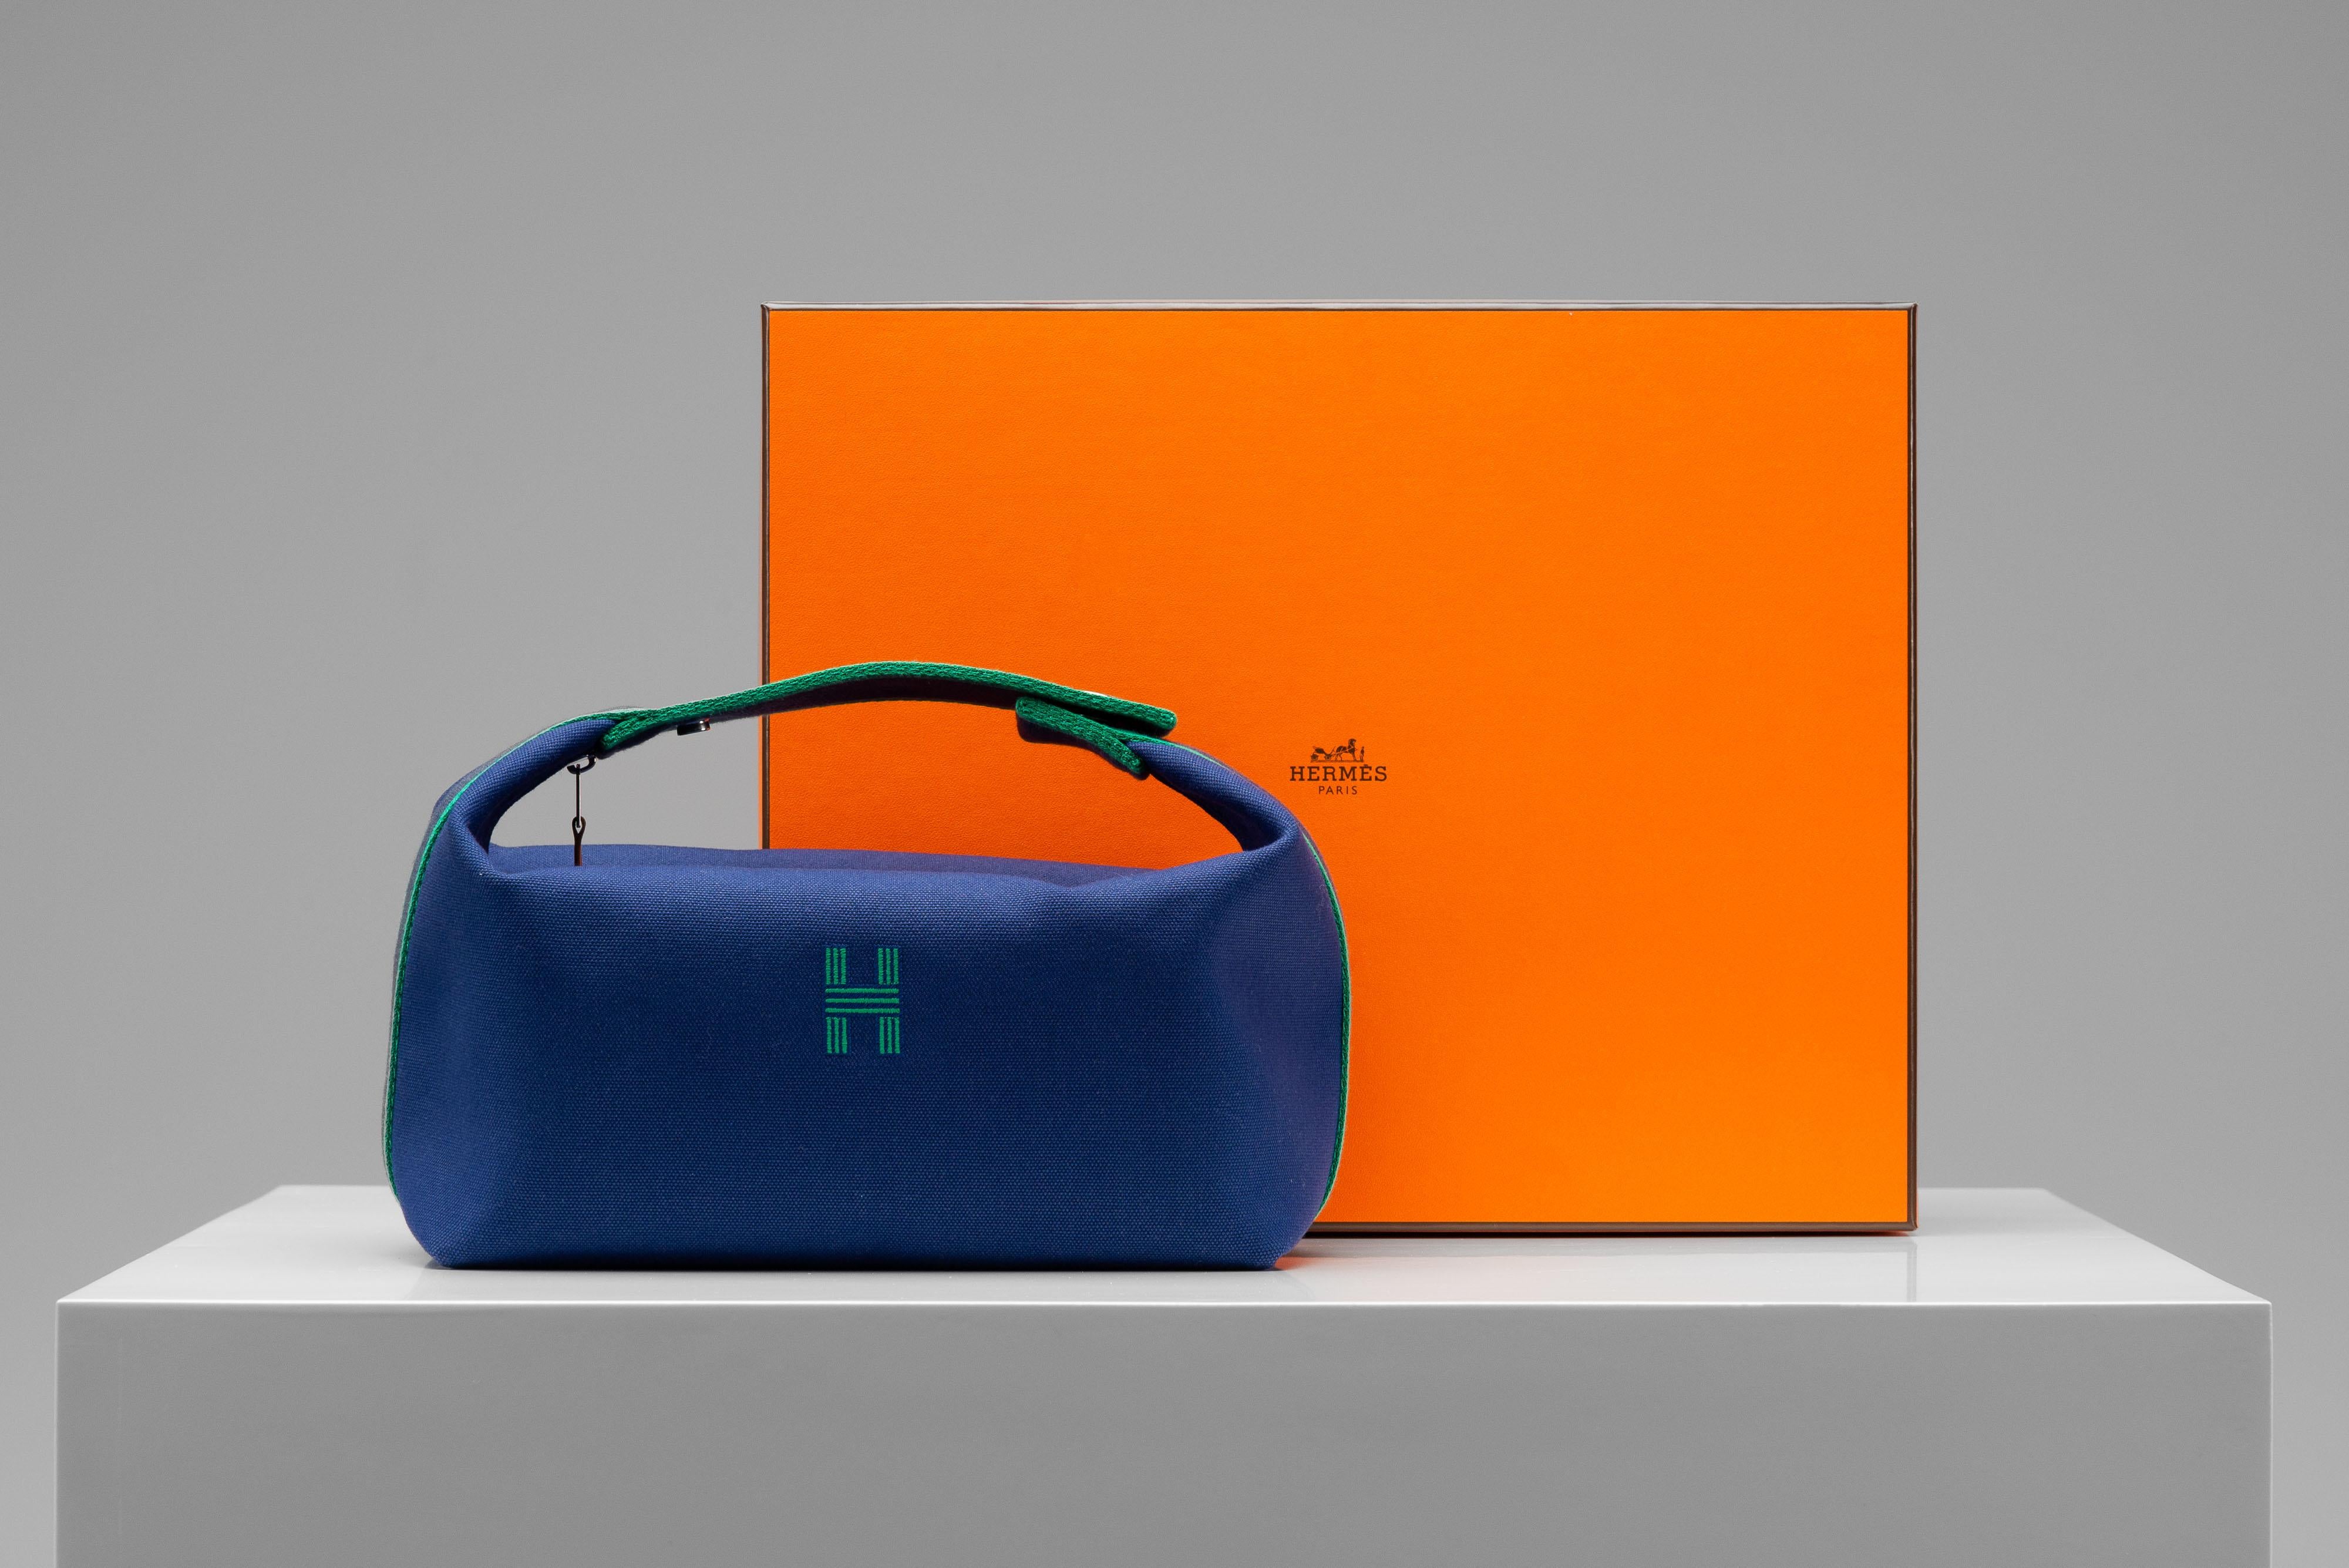 From the collection of SAVINETI we offer this Hermès bag:

- Brand: Hermes
- Model: Bride-a-Brac
- Color: Blue / Green
- Condition: New/ unused
- Year: 2024
- Extras: Full-Set

Authenticity is our core value at SAVINETI and this process meets our